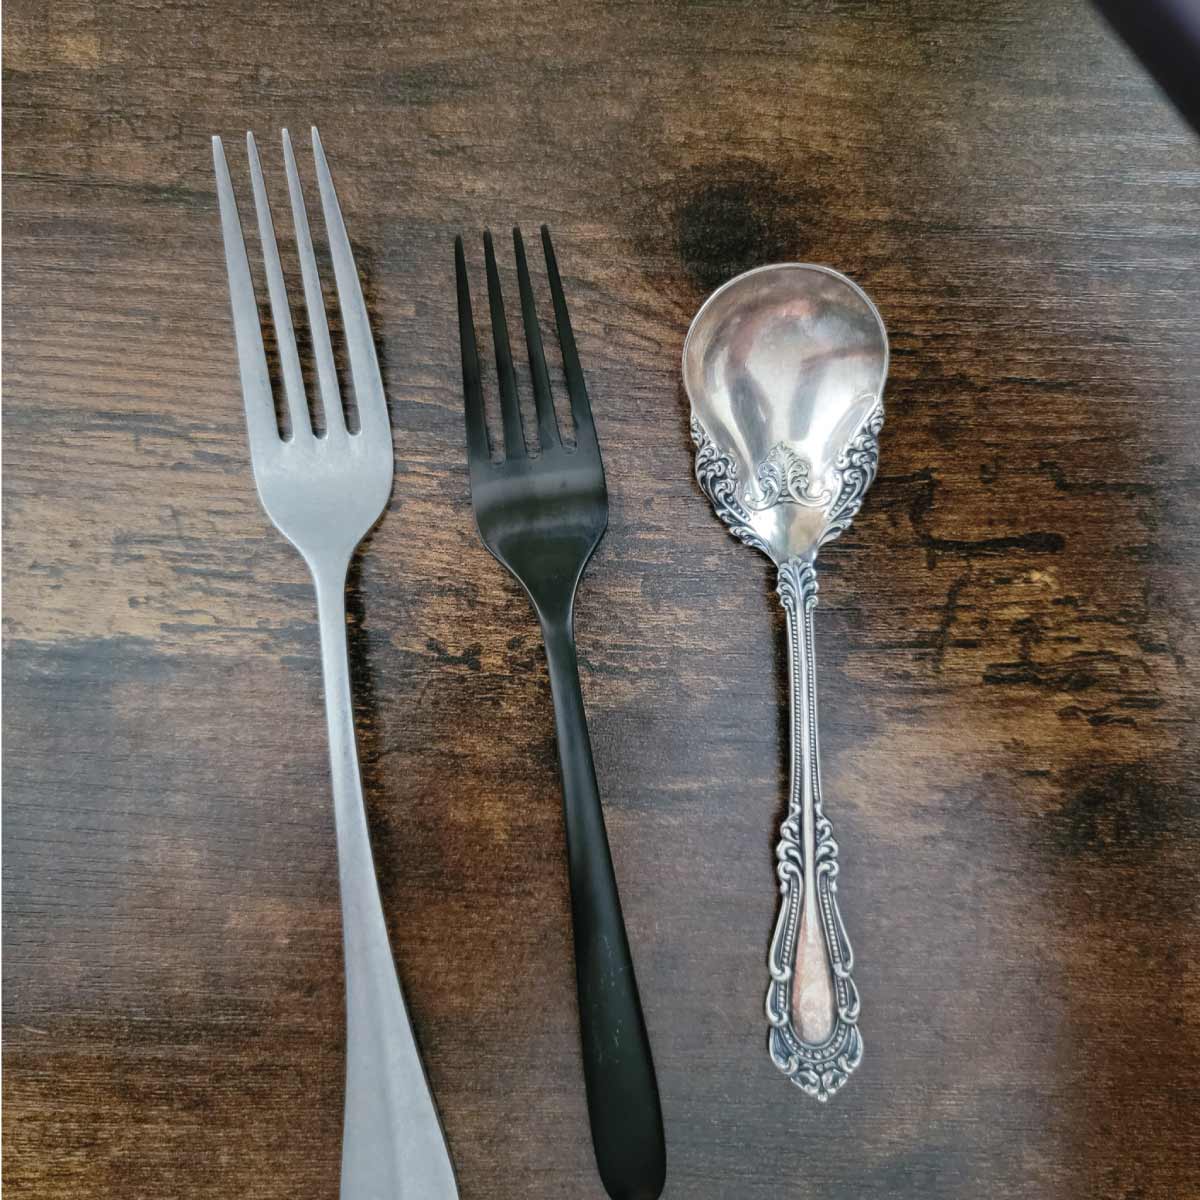 2 forks that are not shiny with no reflection and one antique spoon that does have a reflection of my phone in it.